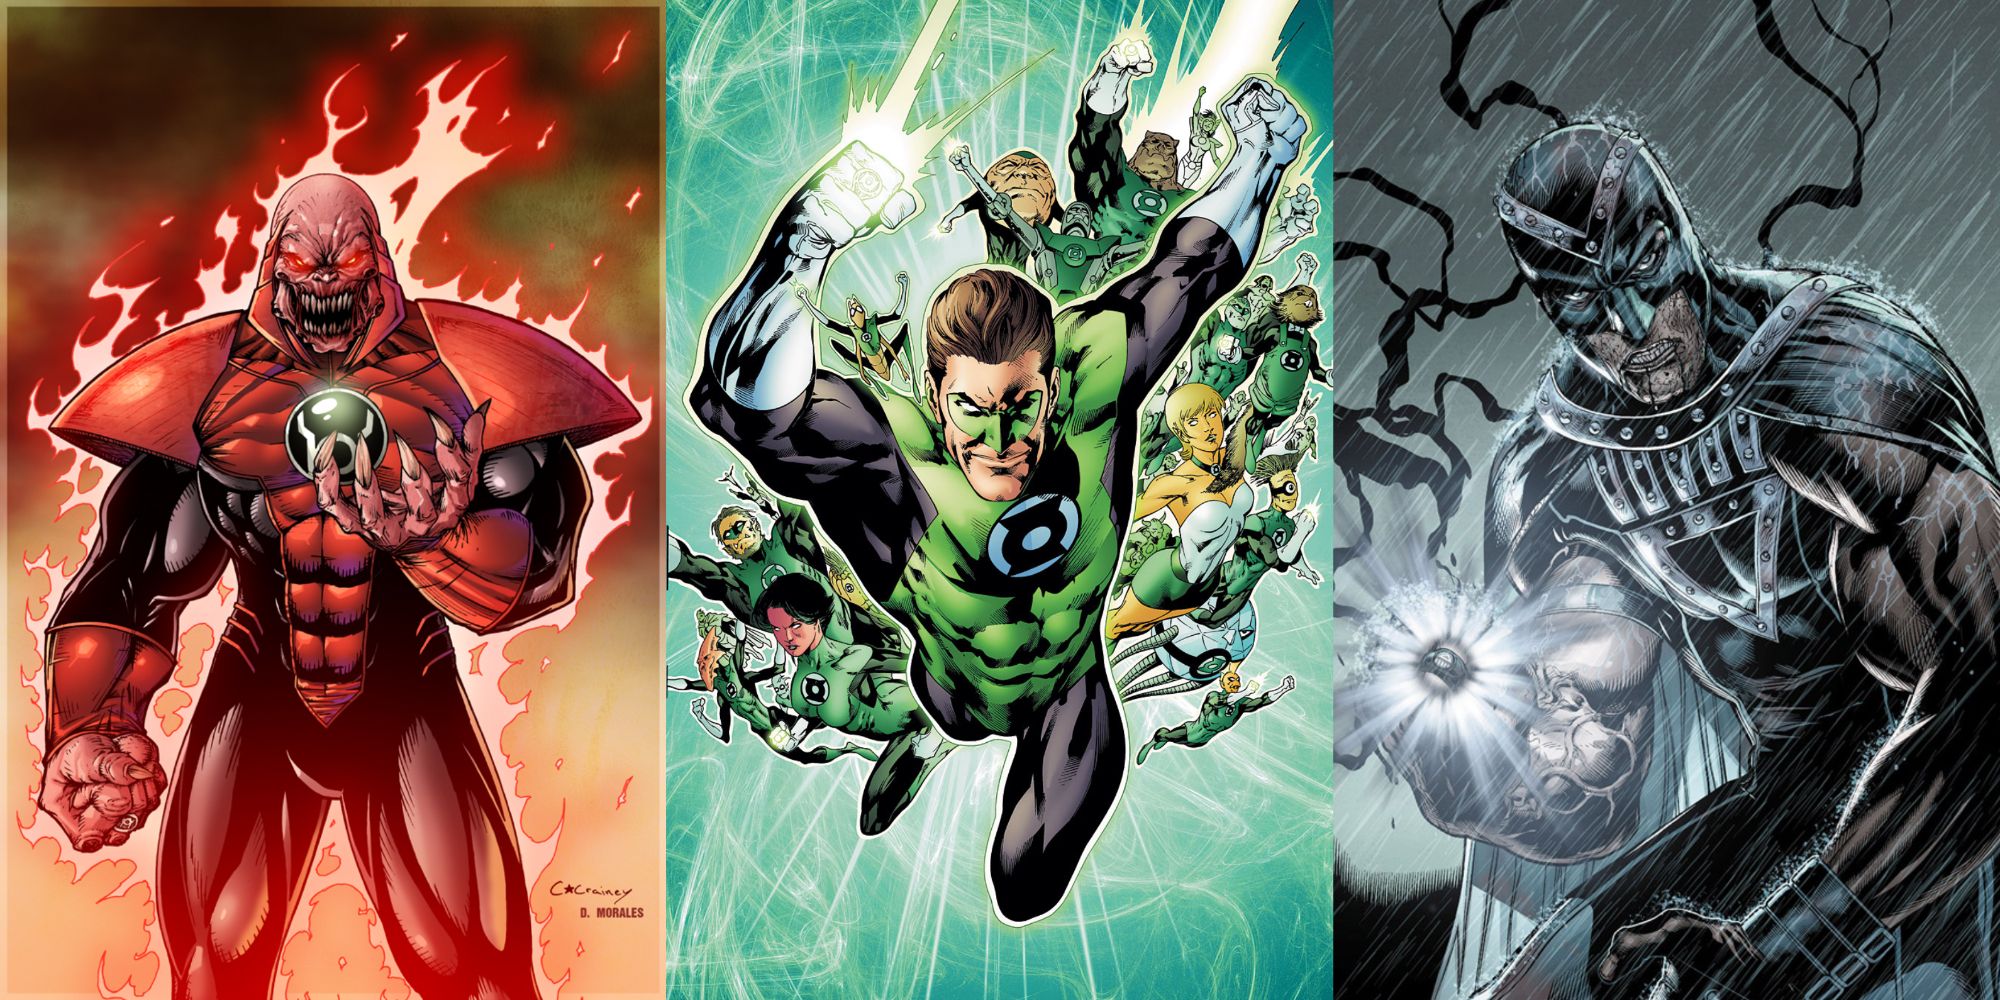 A split image of Atrocitus, Hal Jordan and the Green Lantern Corps, and the Black Hand